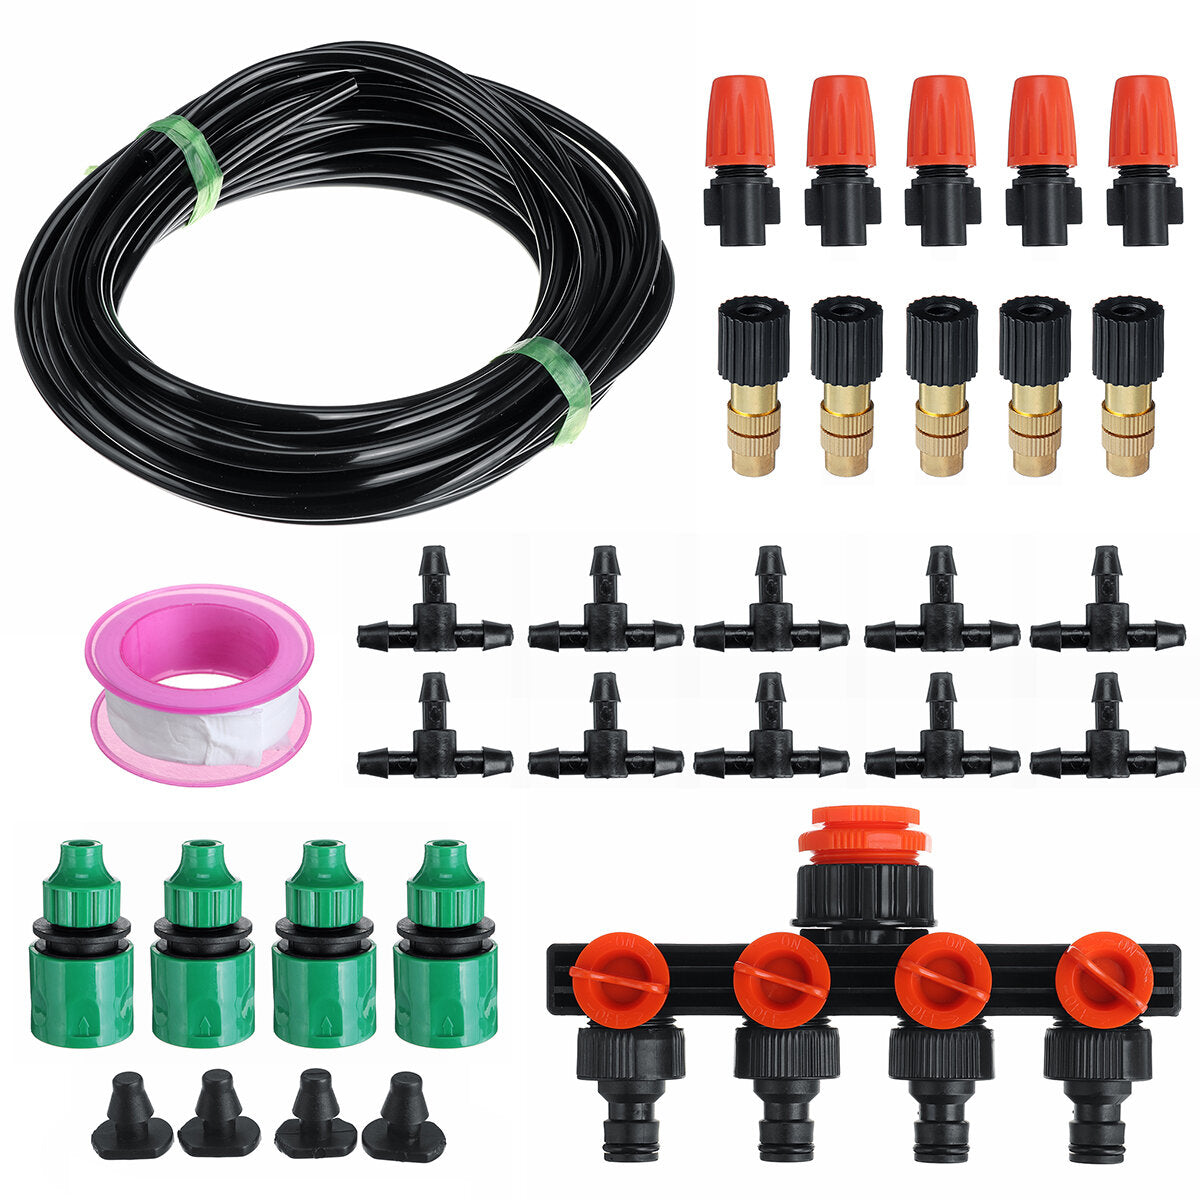 10-50M Auto Irrigation System Water Hose Plants Garden Watering Micro Drip Kit 10/20/30/40/50 Meters